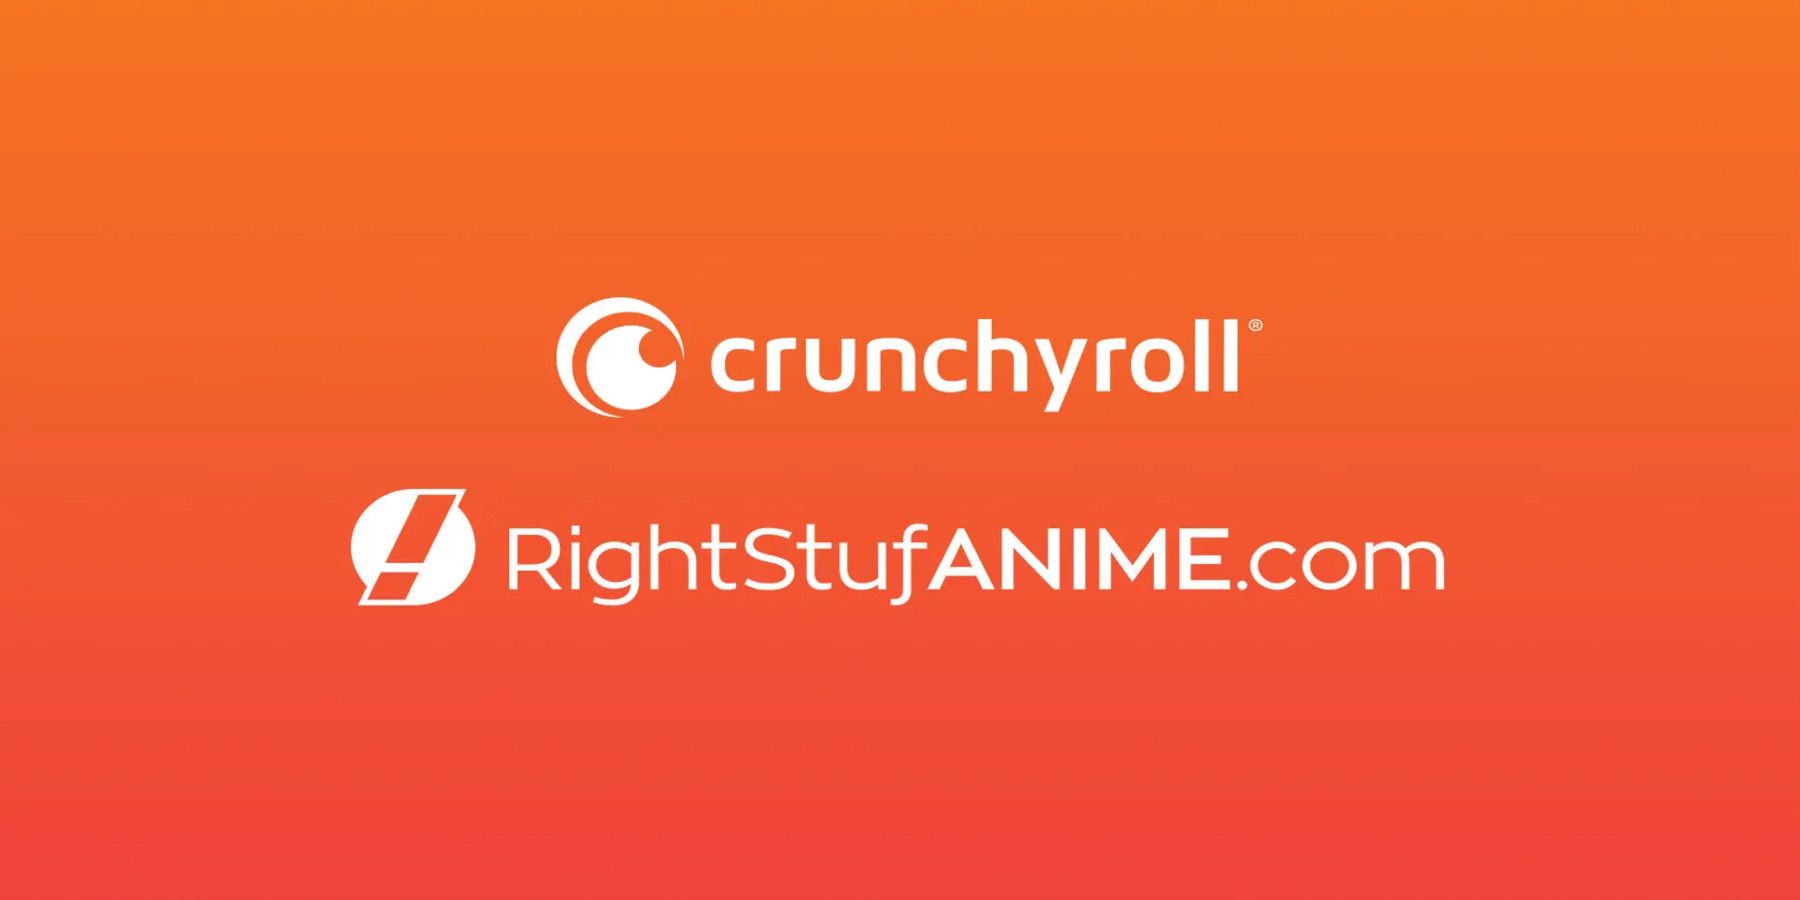 Is Crunchyroll the Right Specialty Streamer for the Moment? – The